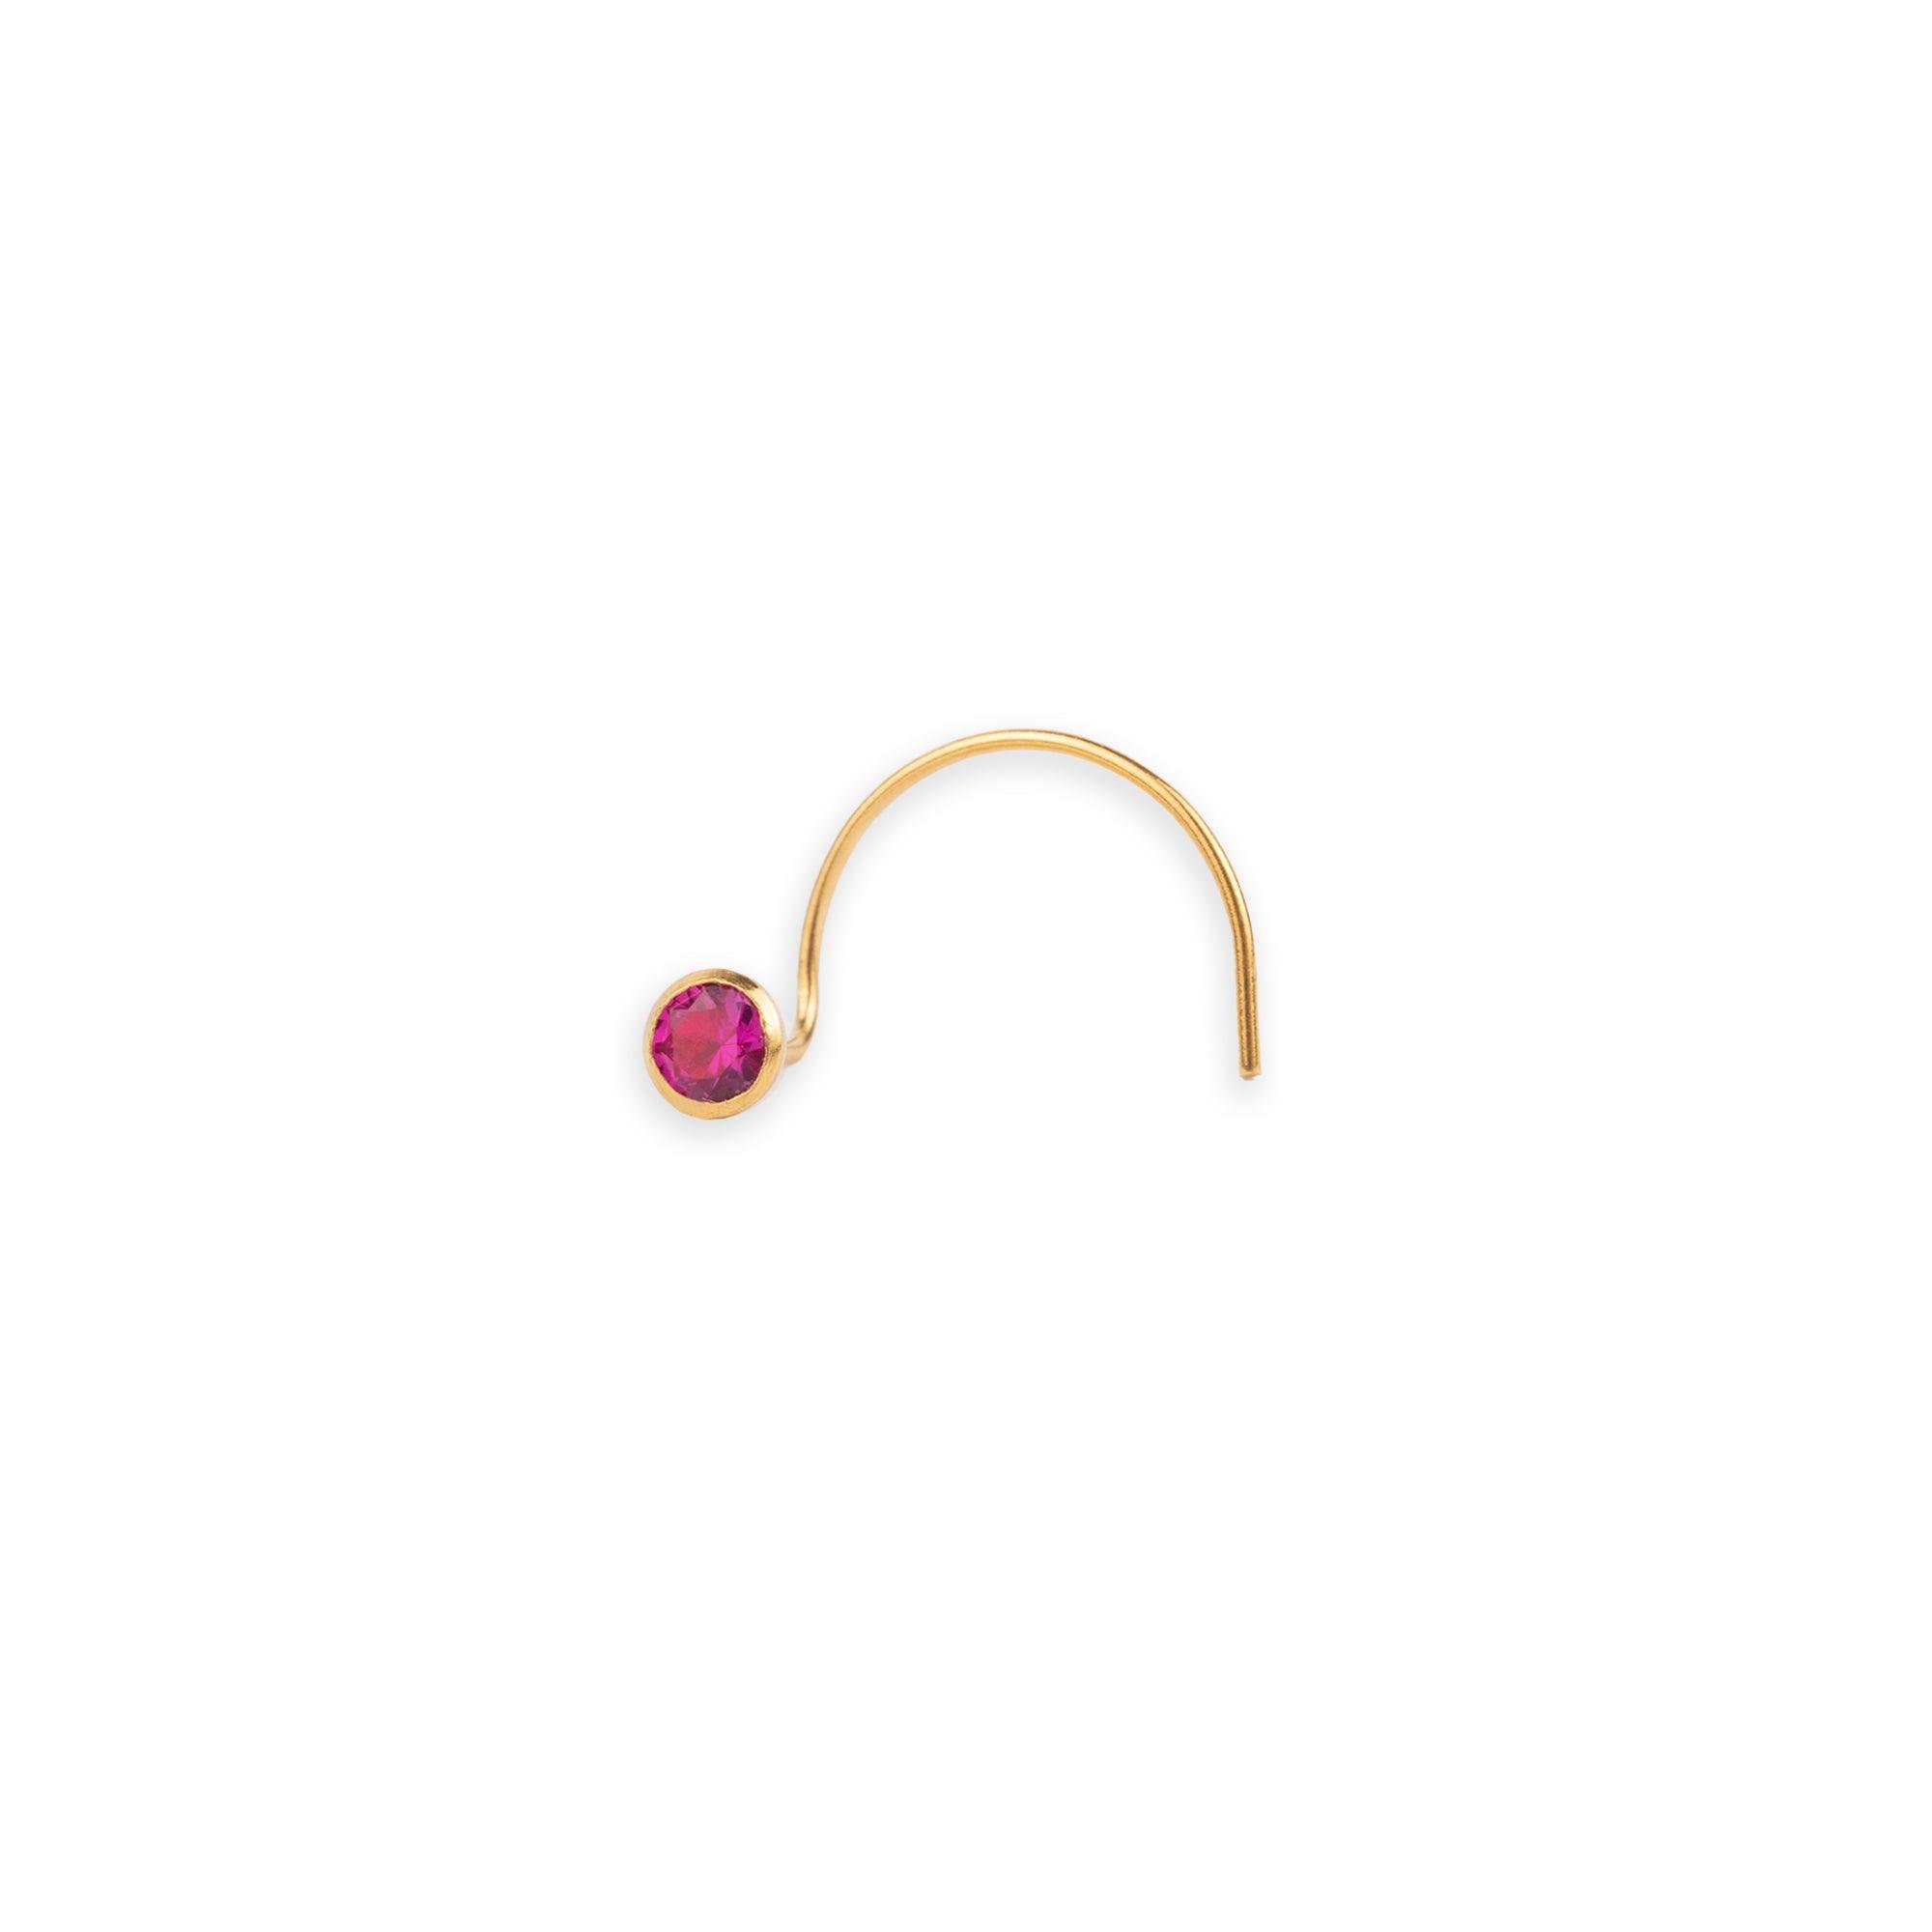 18ct Yellow Gold Wire Coil Nose Stud with Cubic Zirconia in a Rub Over (Bezel) Setting NS-2110